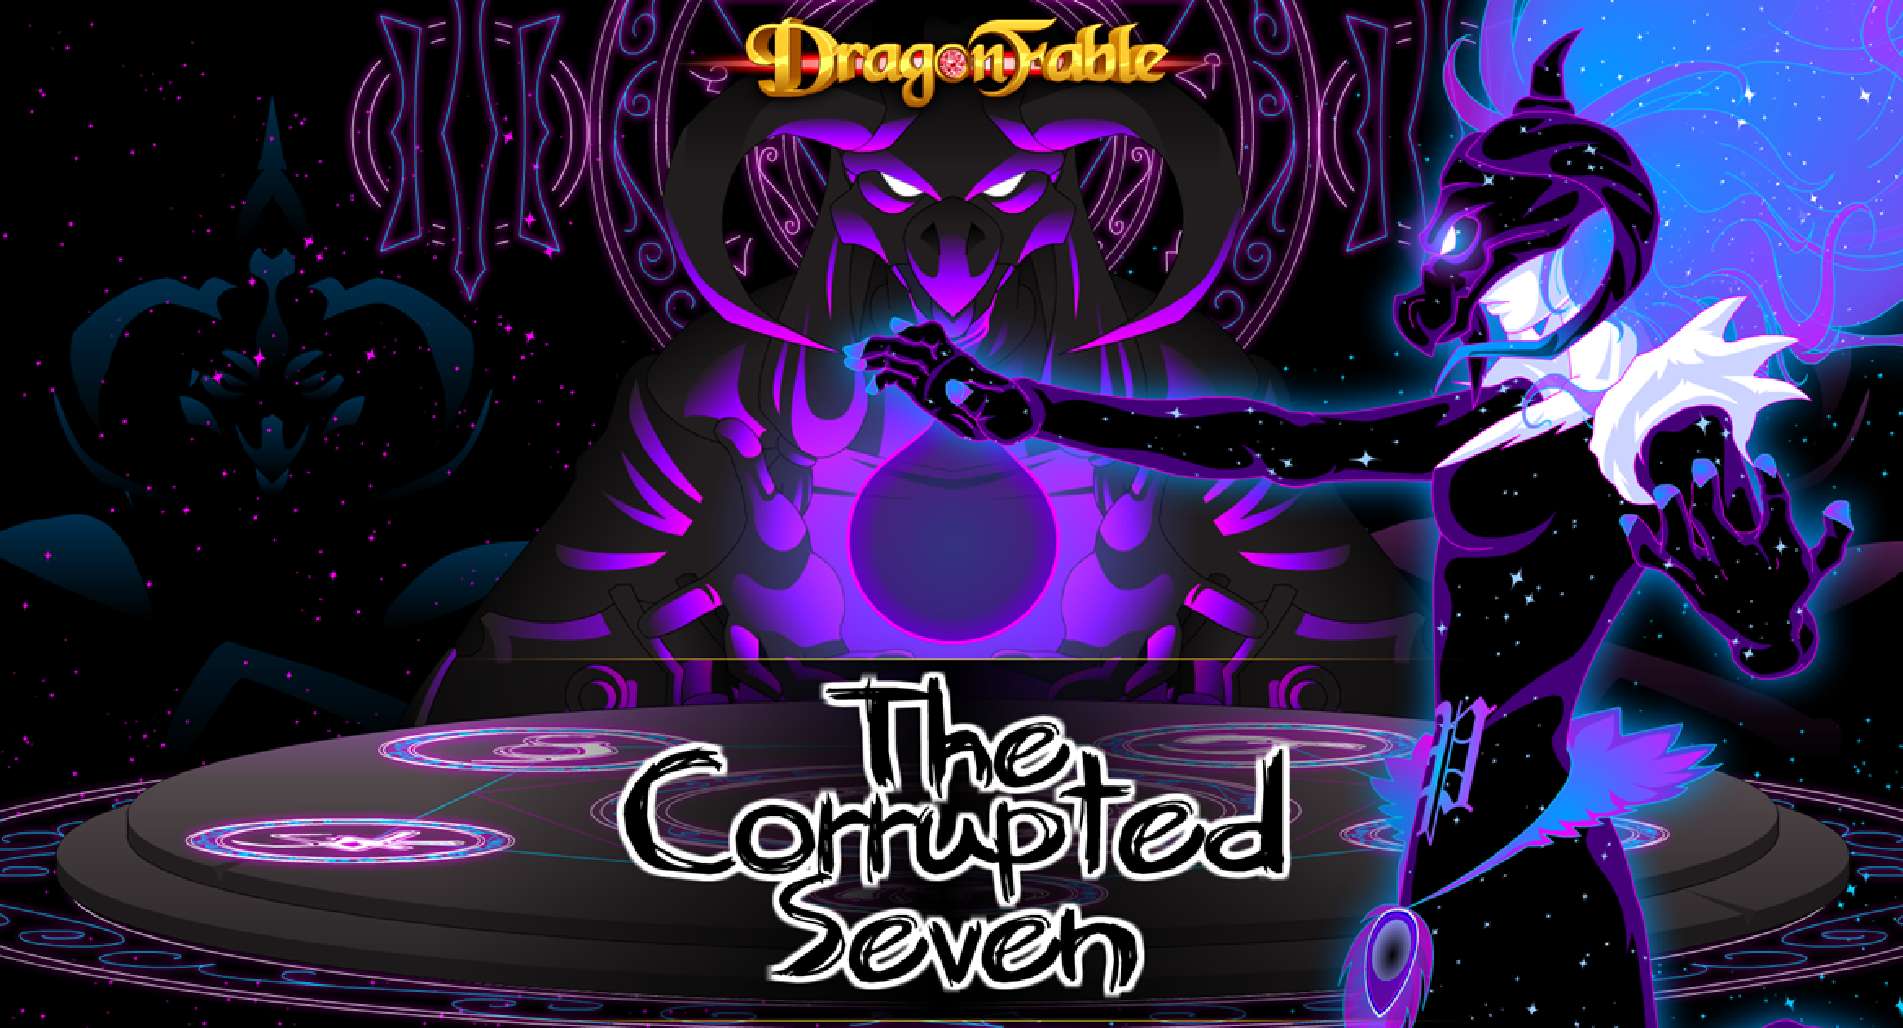 DragonFable Releases Pride Of The Corrupted Seven Into The Arena At The Edge Of Time